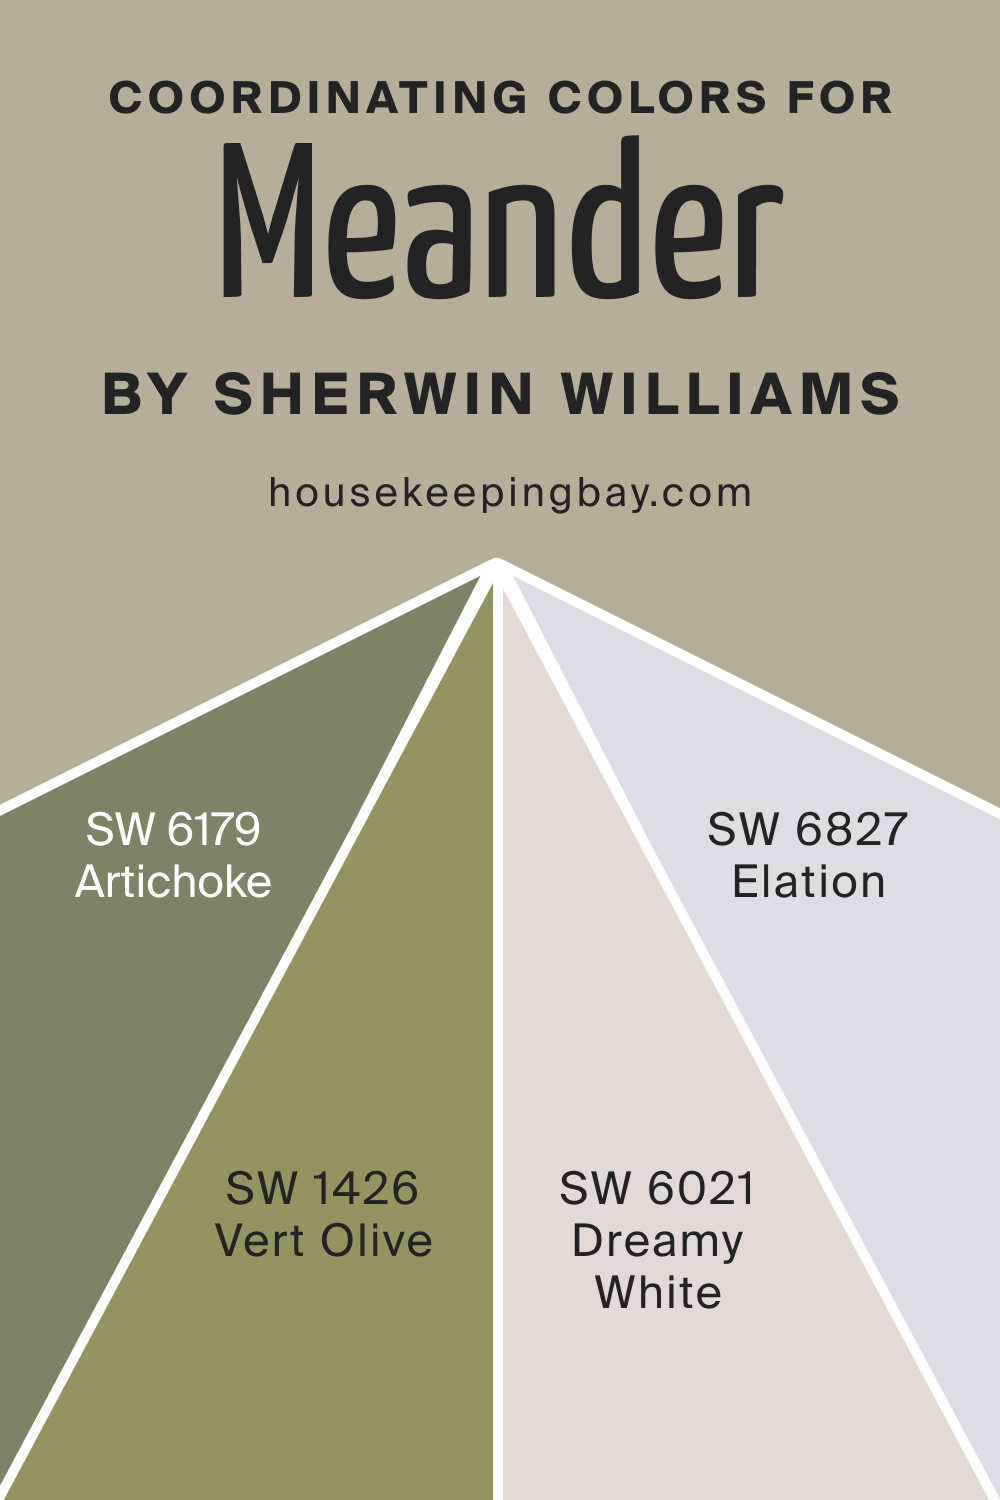 Coordinating Colors for SW 9522 Meander by Sherwin Williams